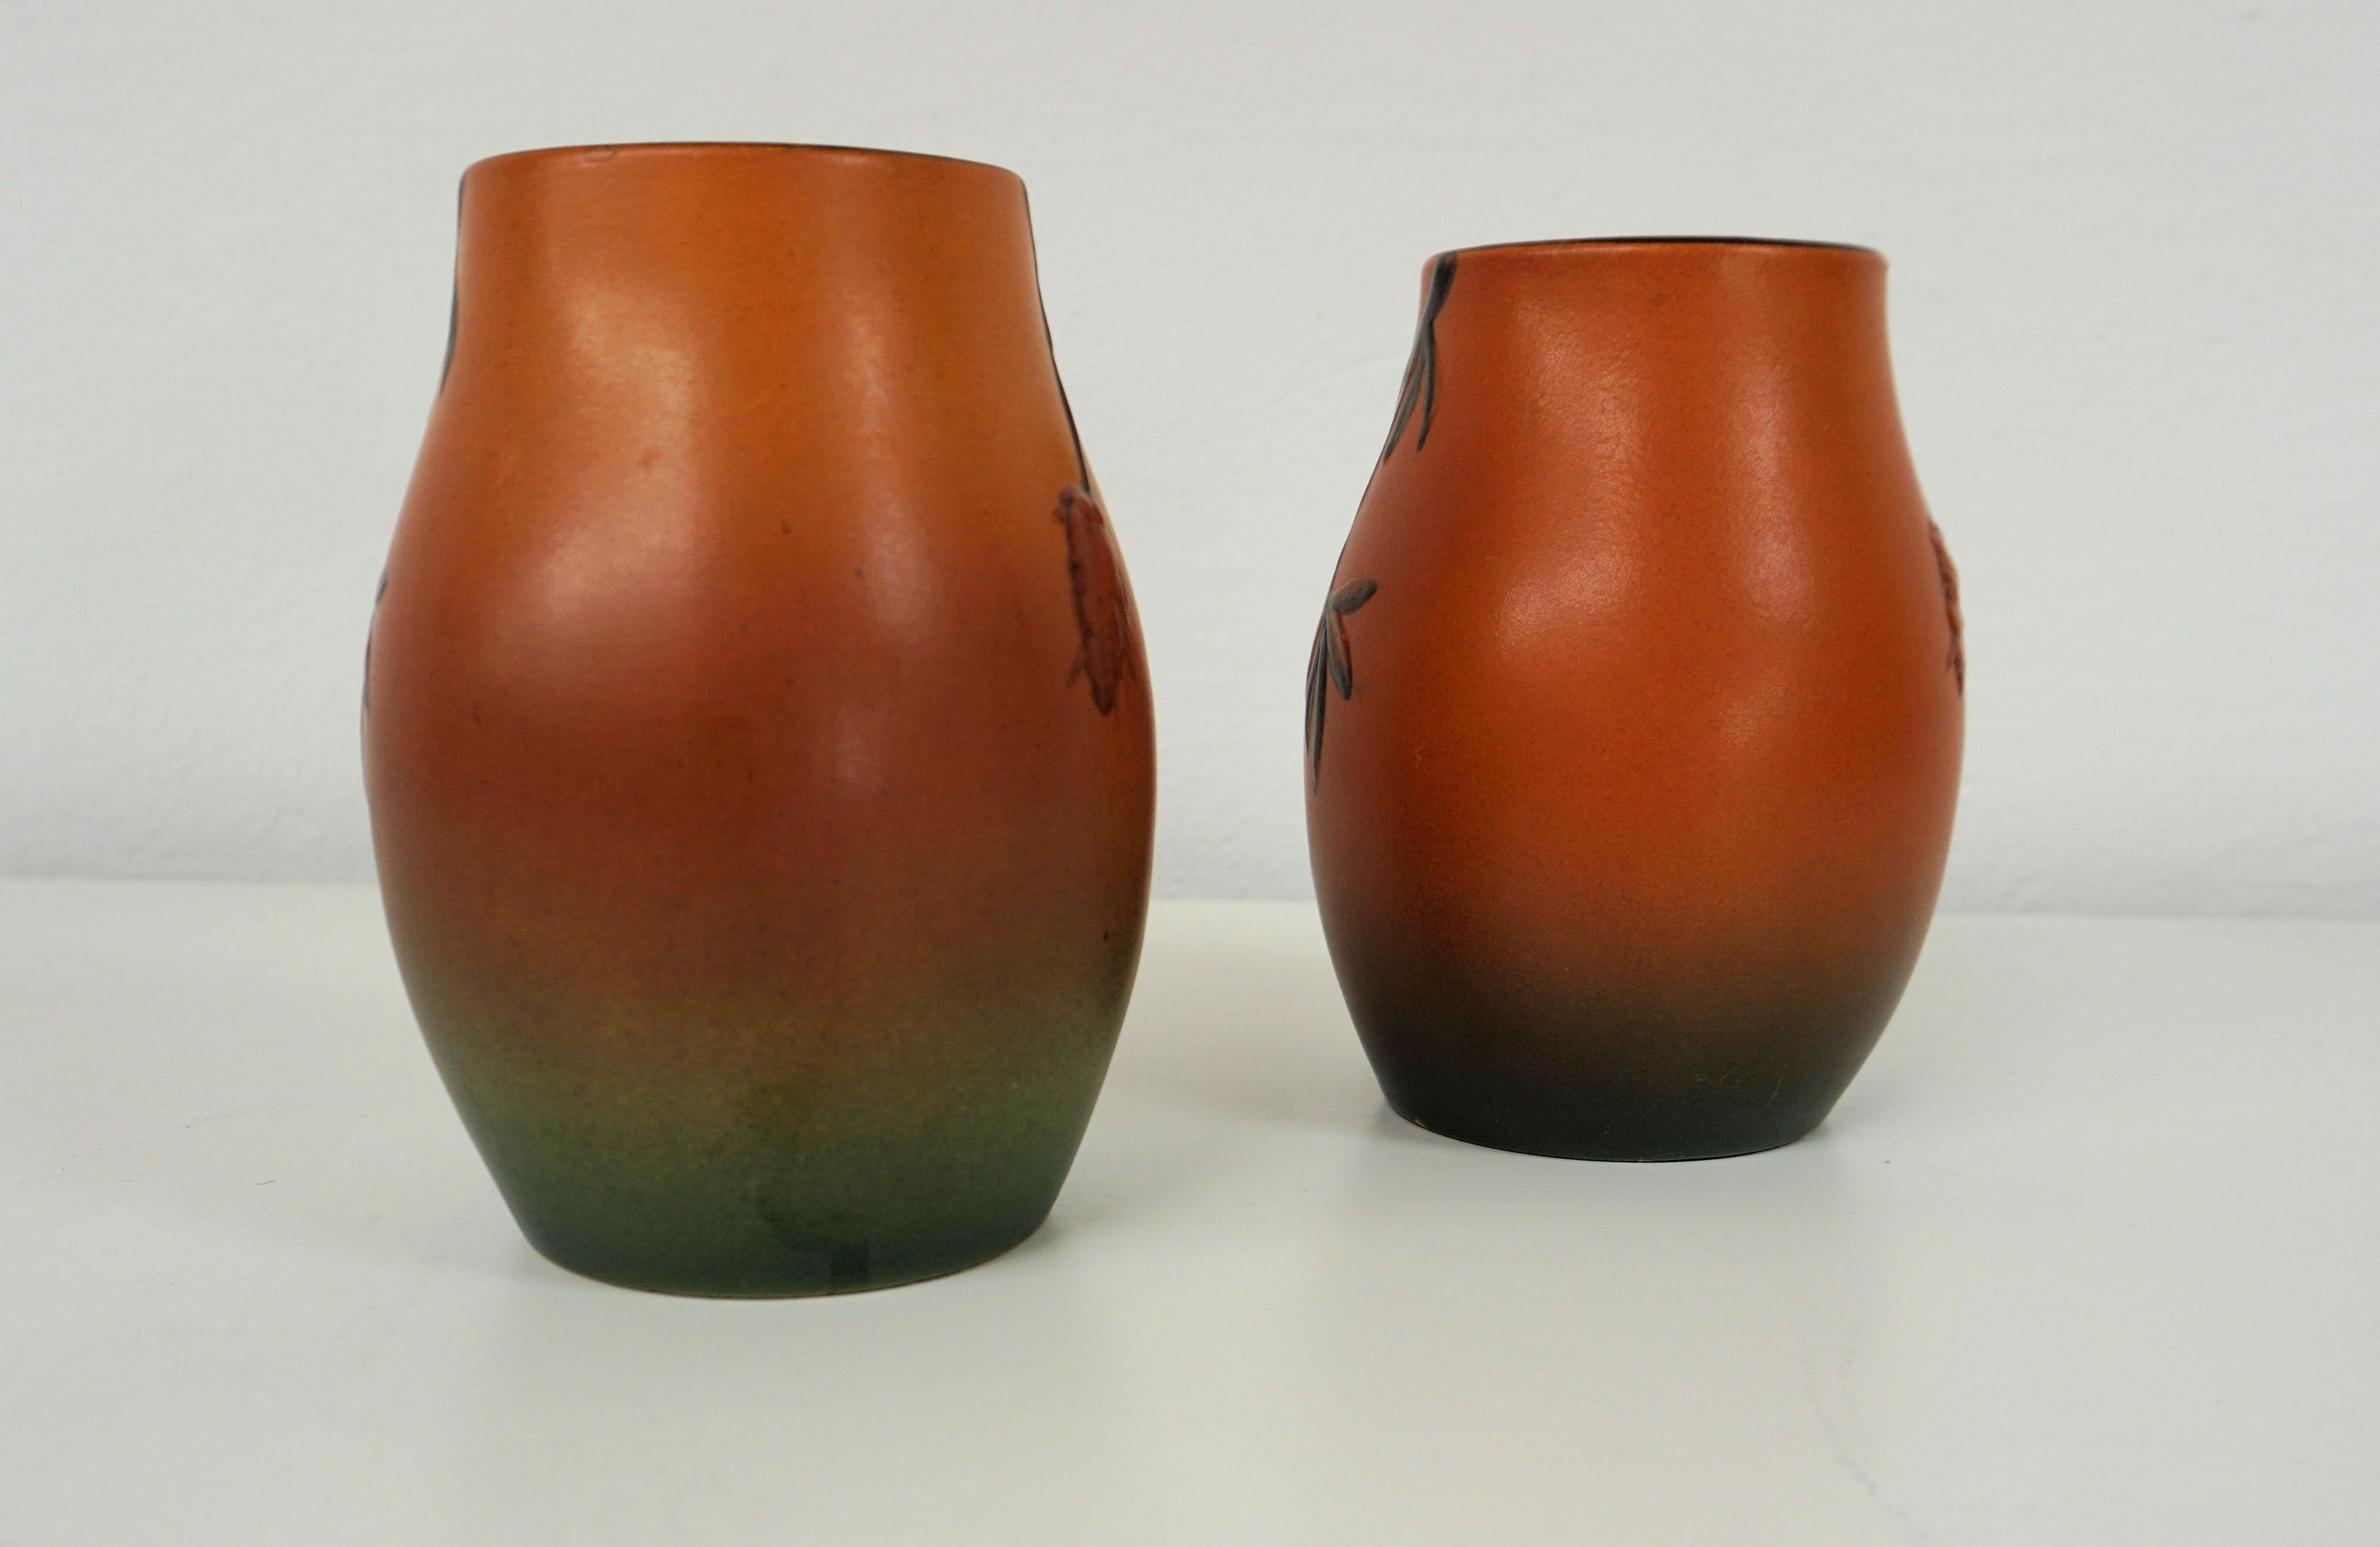 Early 20th Century 1920s Handcrafted Danish Art Nouveau Parrot Decorated Vases by P. Ipsens Enke